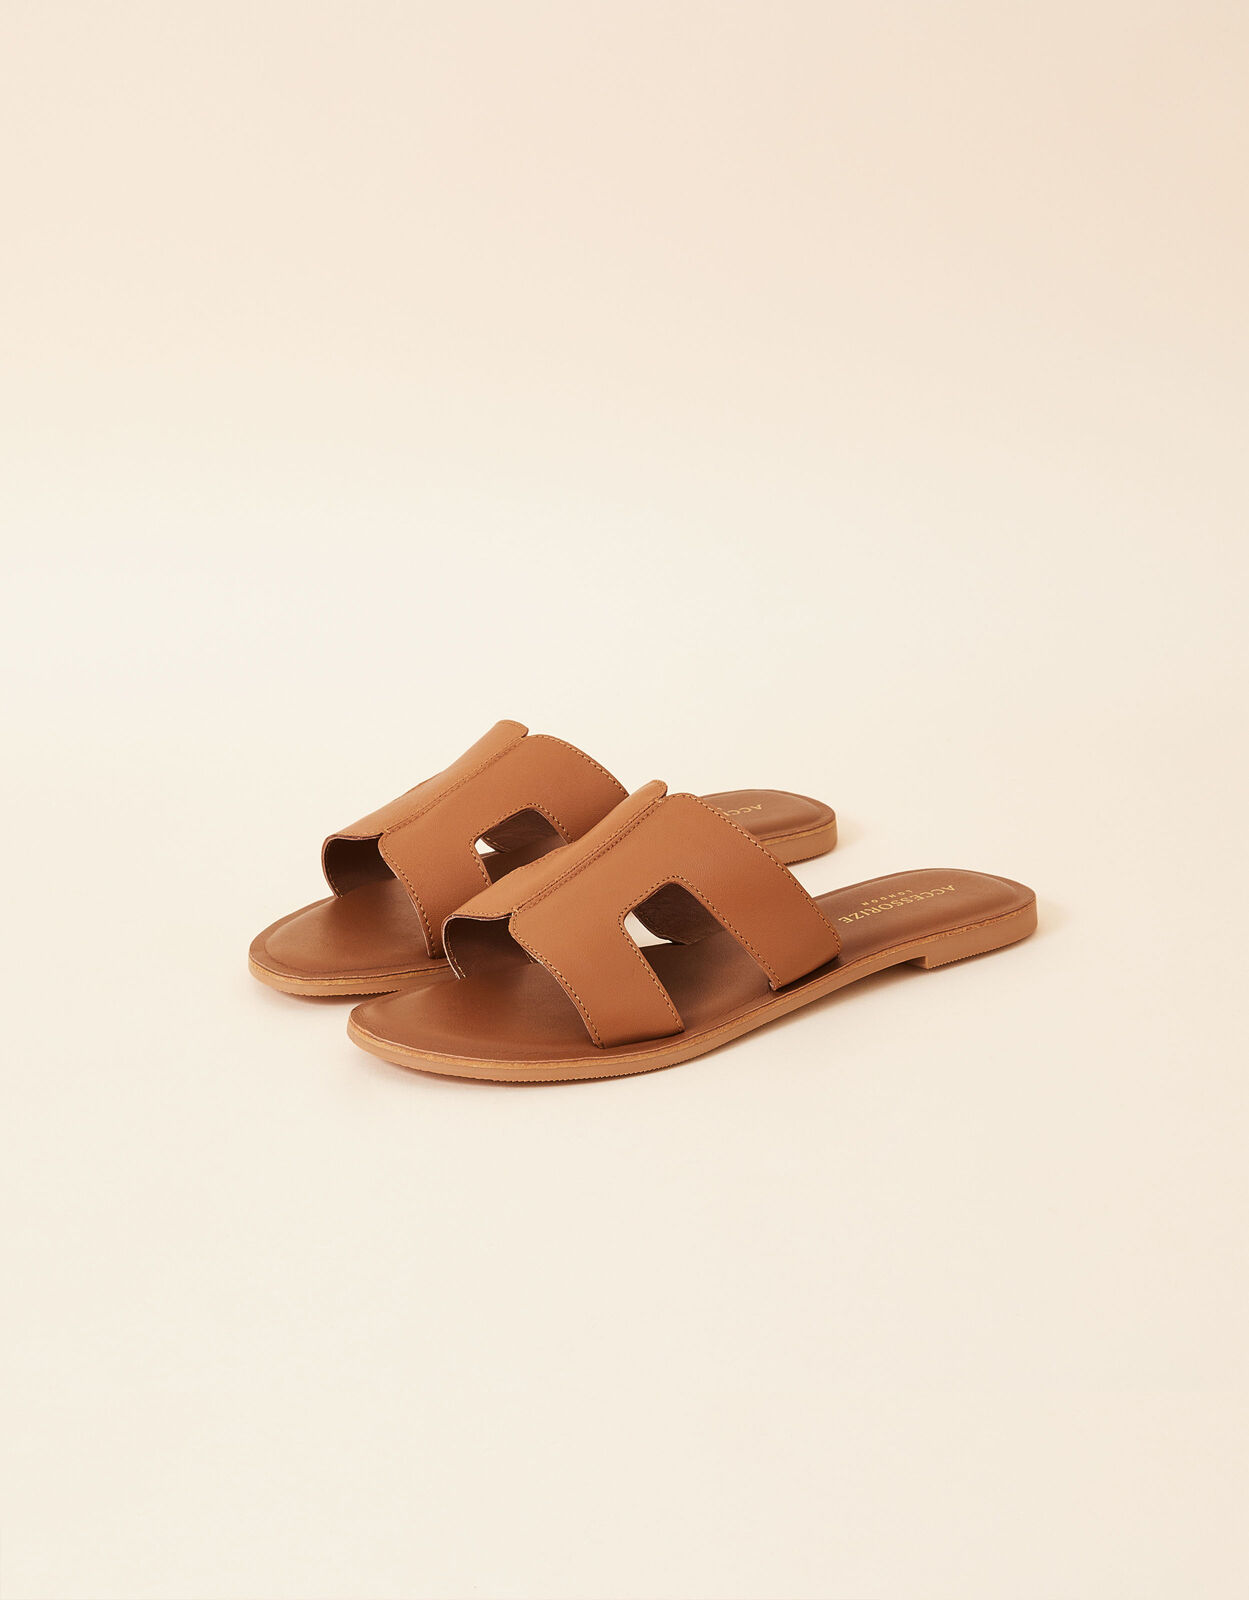 Accessorize Leather Cut-Out Detail Sliders Sandals | Heathrow Reserve ...